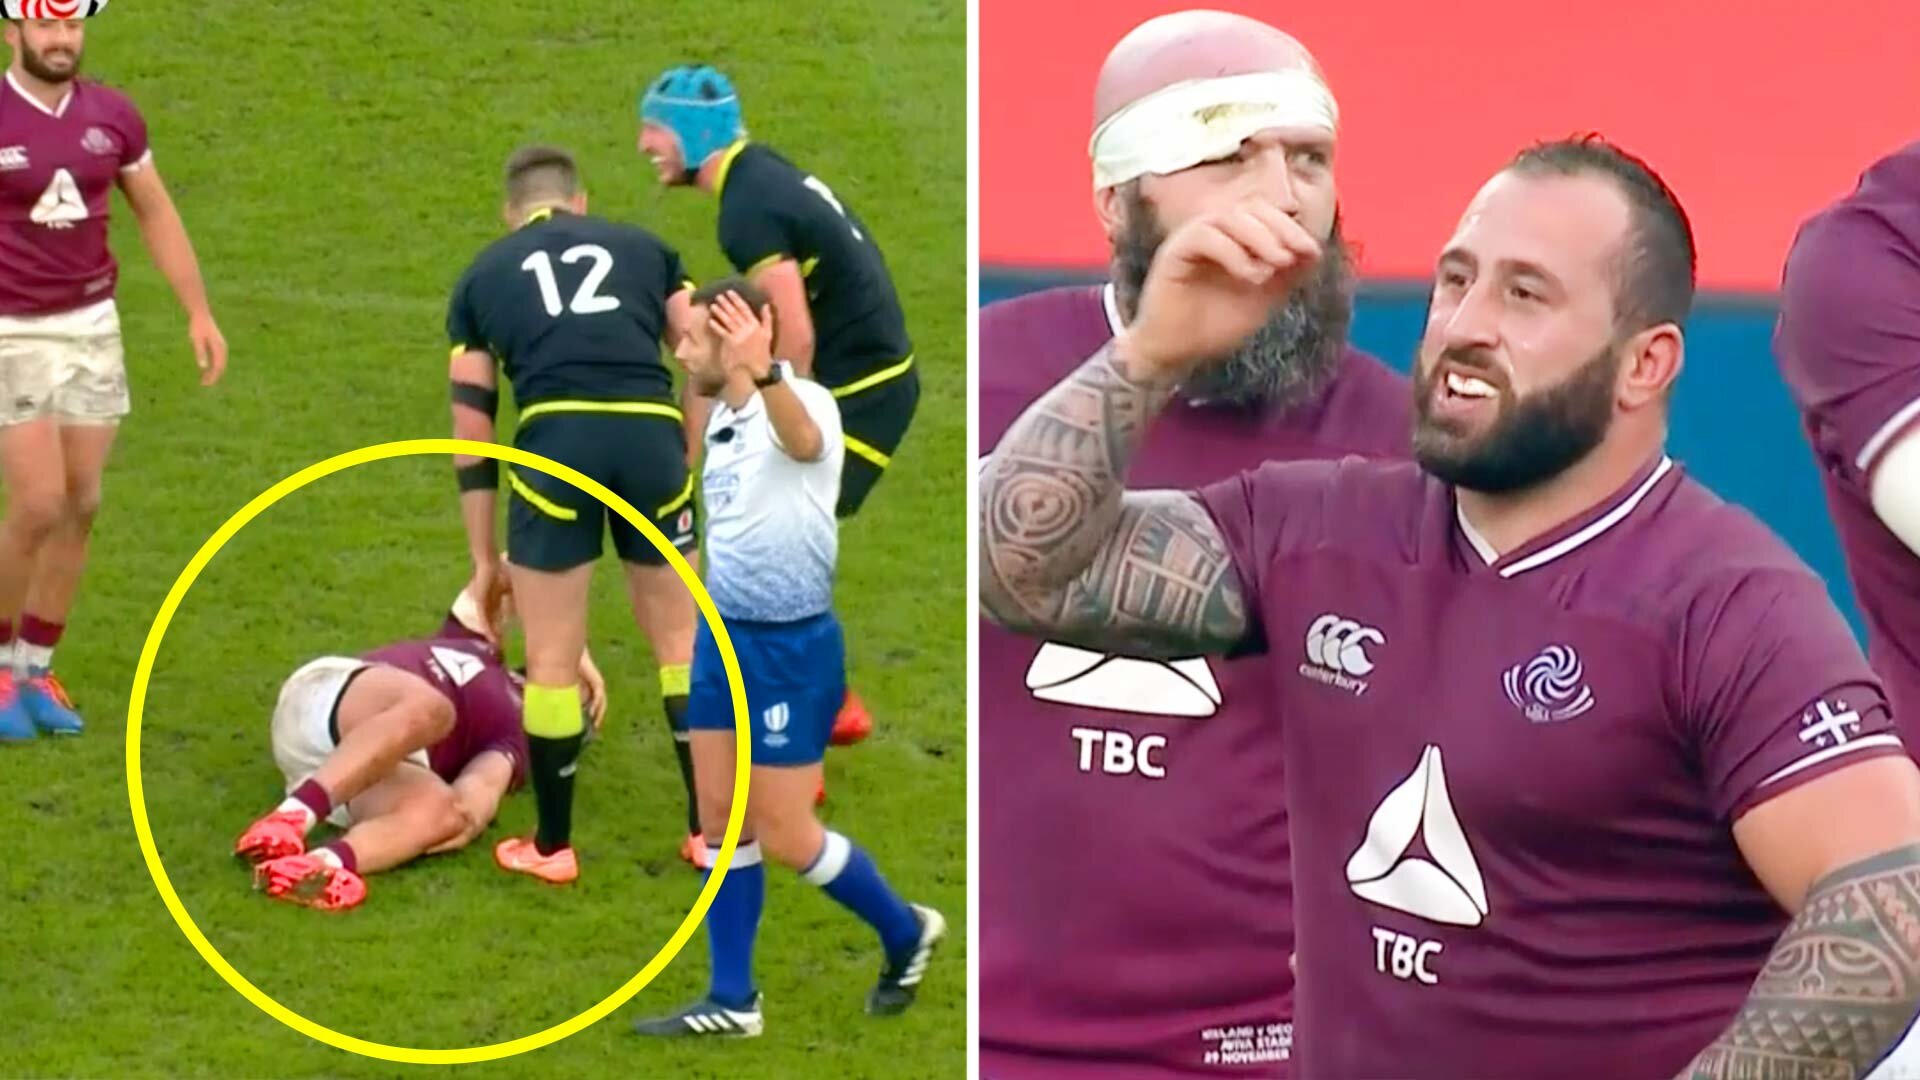 TV viewers complain in after ref mic picks up horrifying screams of injured Georgian player